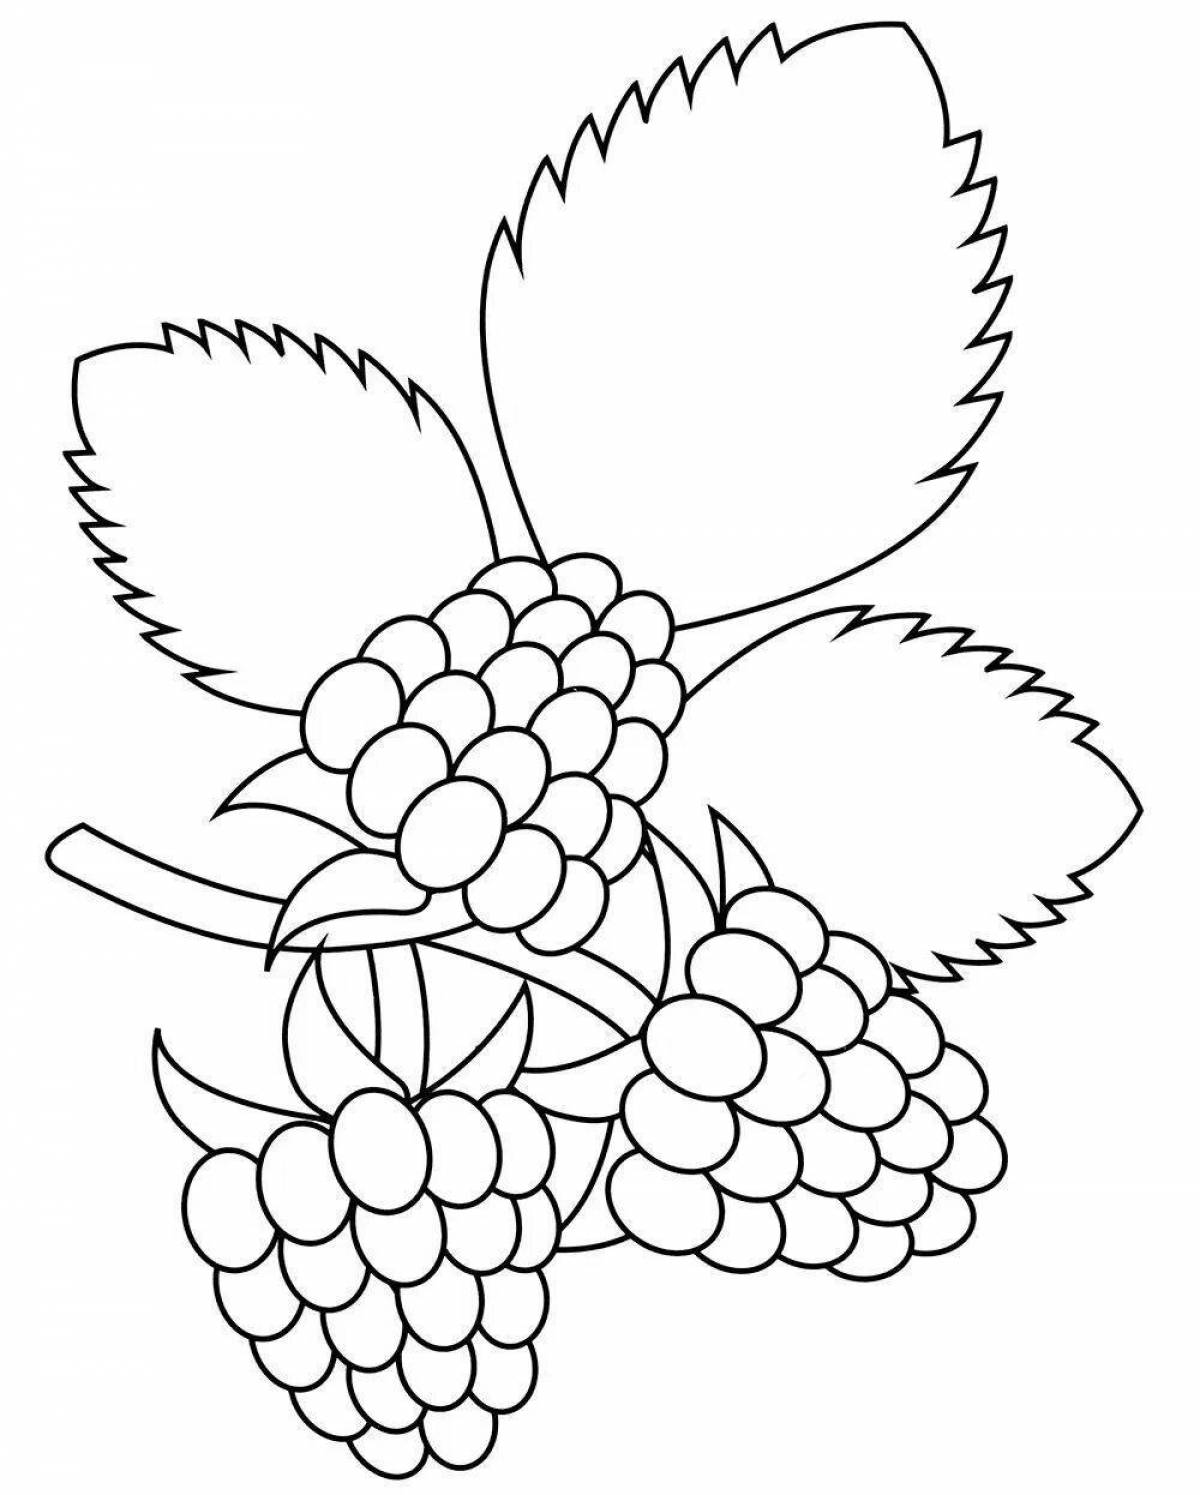 Fun raspberry coloring book for 3-4 year olds